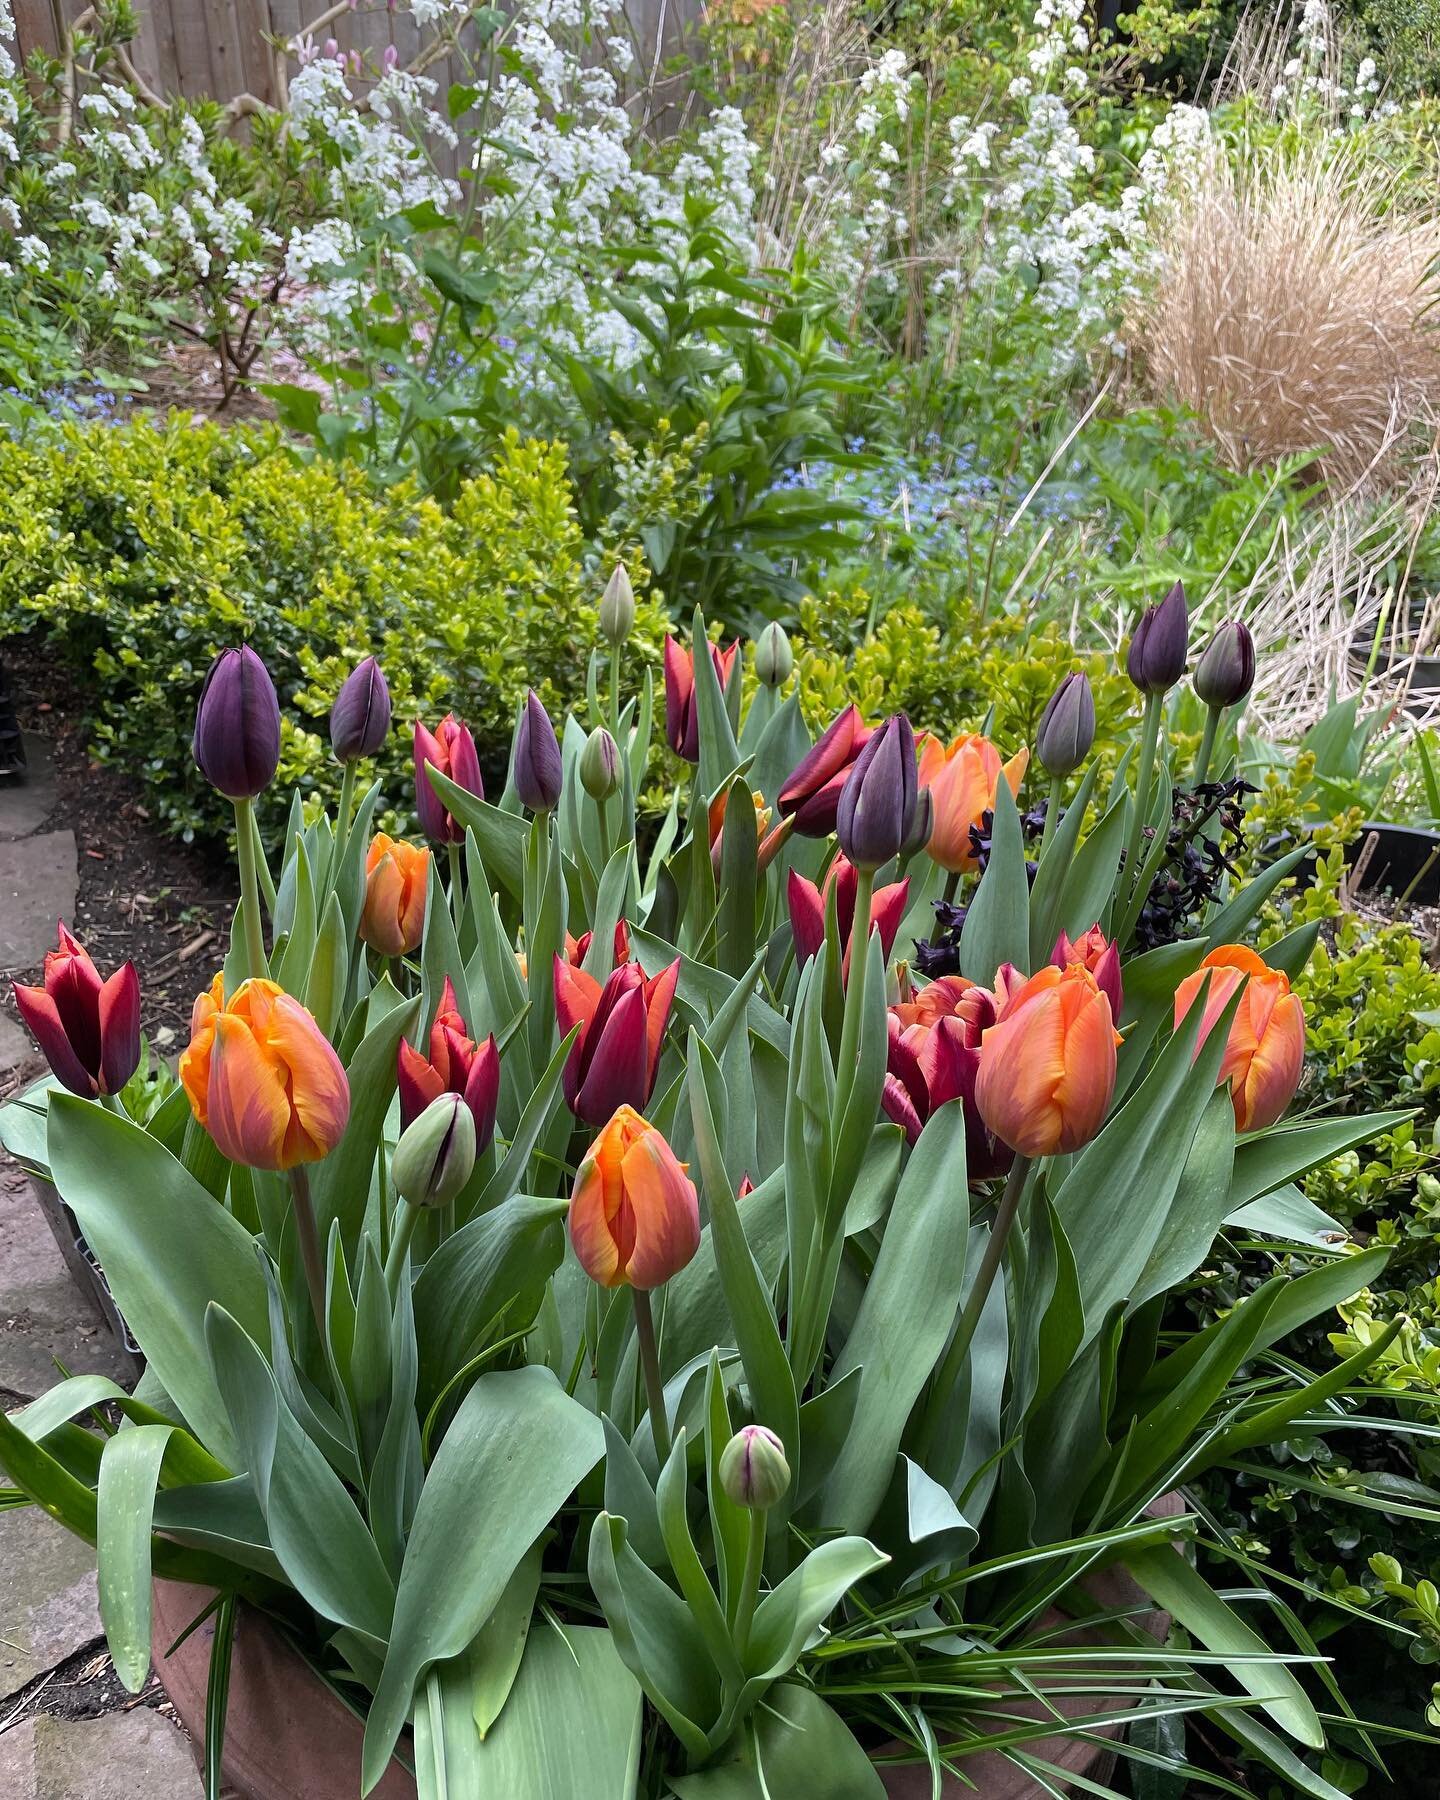 BULB LASAGNA WORKSHOP
Saturday, October 14, 2023, 10:30-12:30
Location:  Gardener&rsquo;s Kit HQ in Victoria
Join us for a fun-filled morning creating a beautiful container chock full of spring-flowering bulbs that will bloom in succession over many 